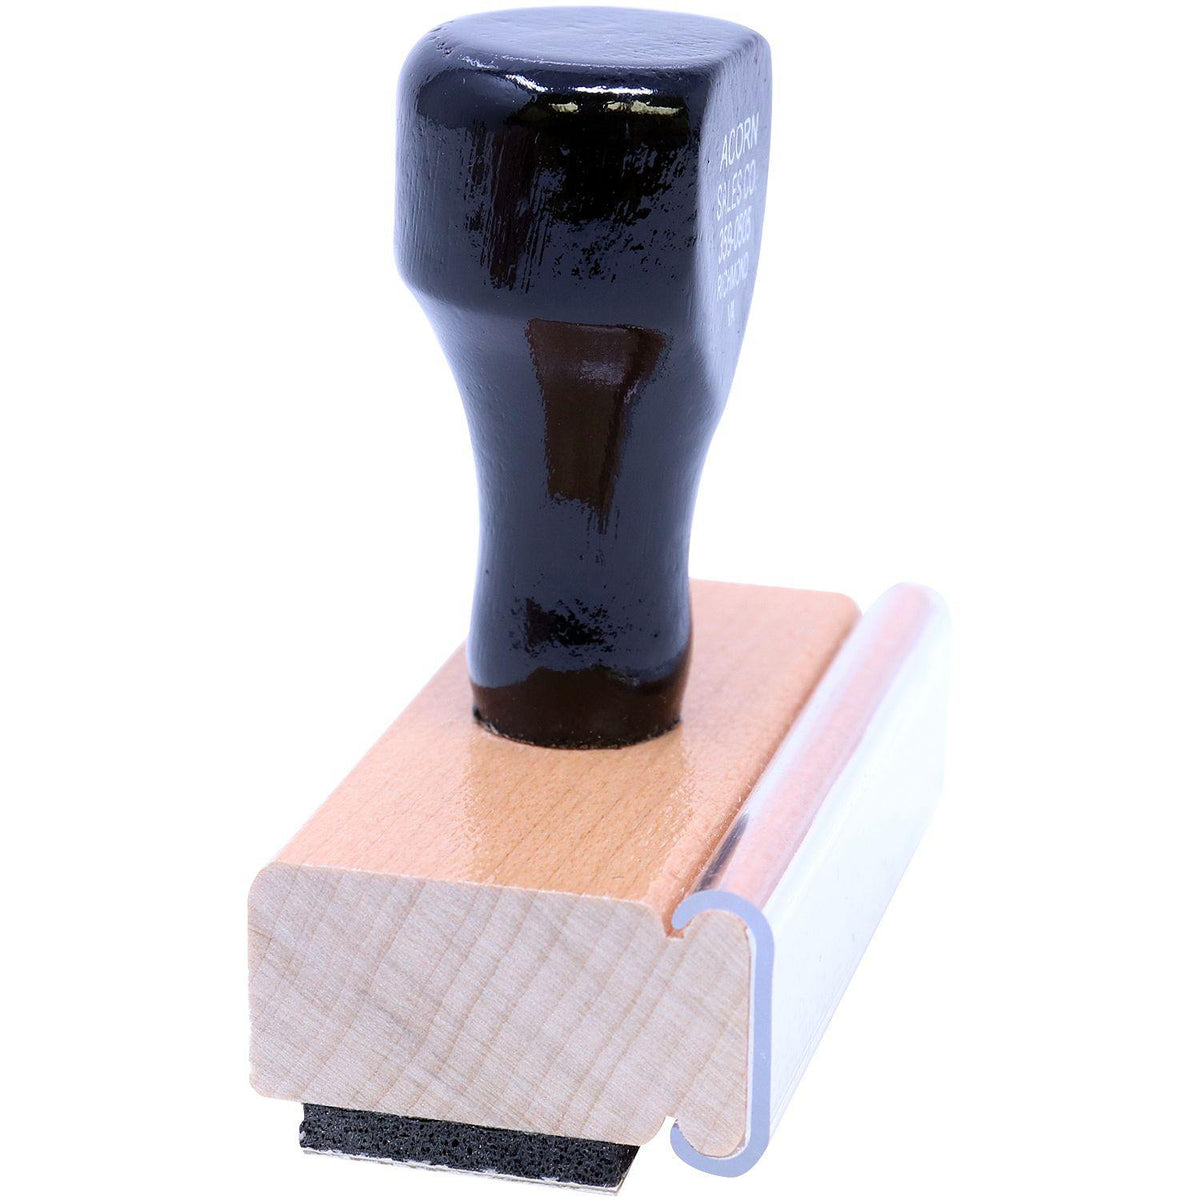 Side View of Large Incomplete Homework Rubber Stamp at an Angle